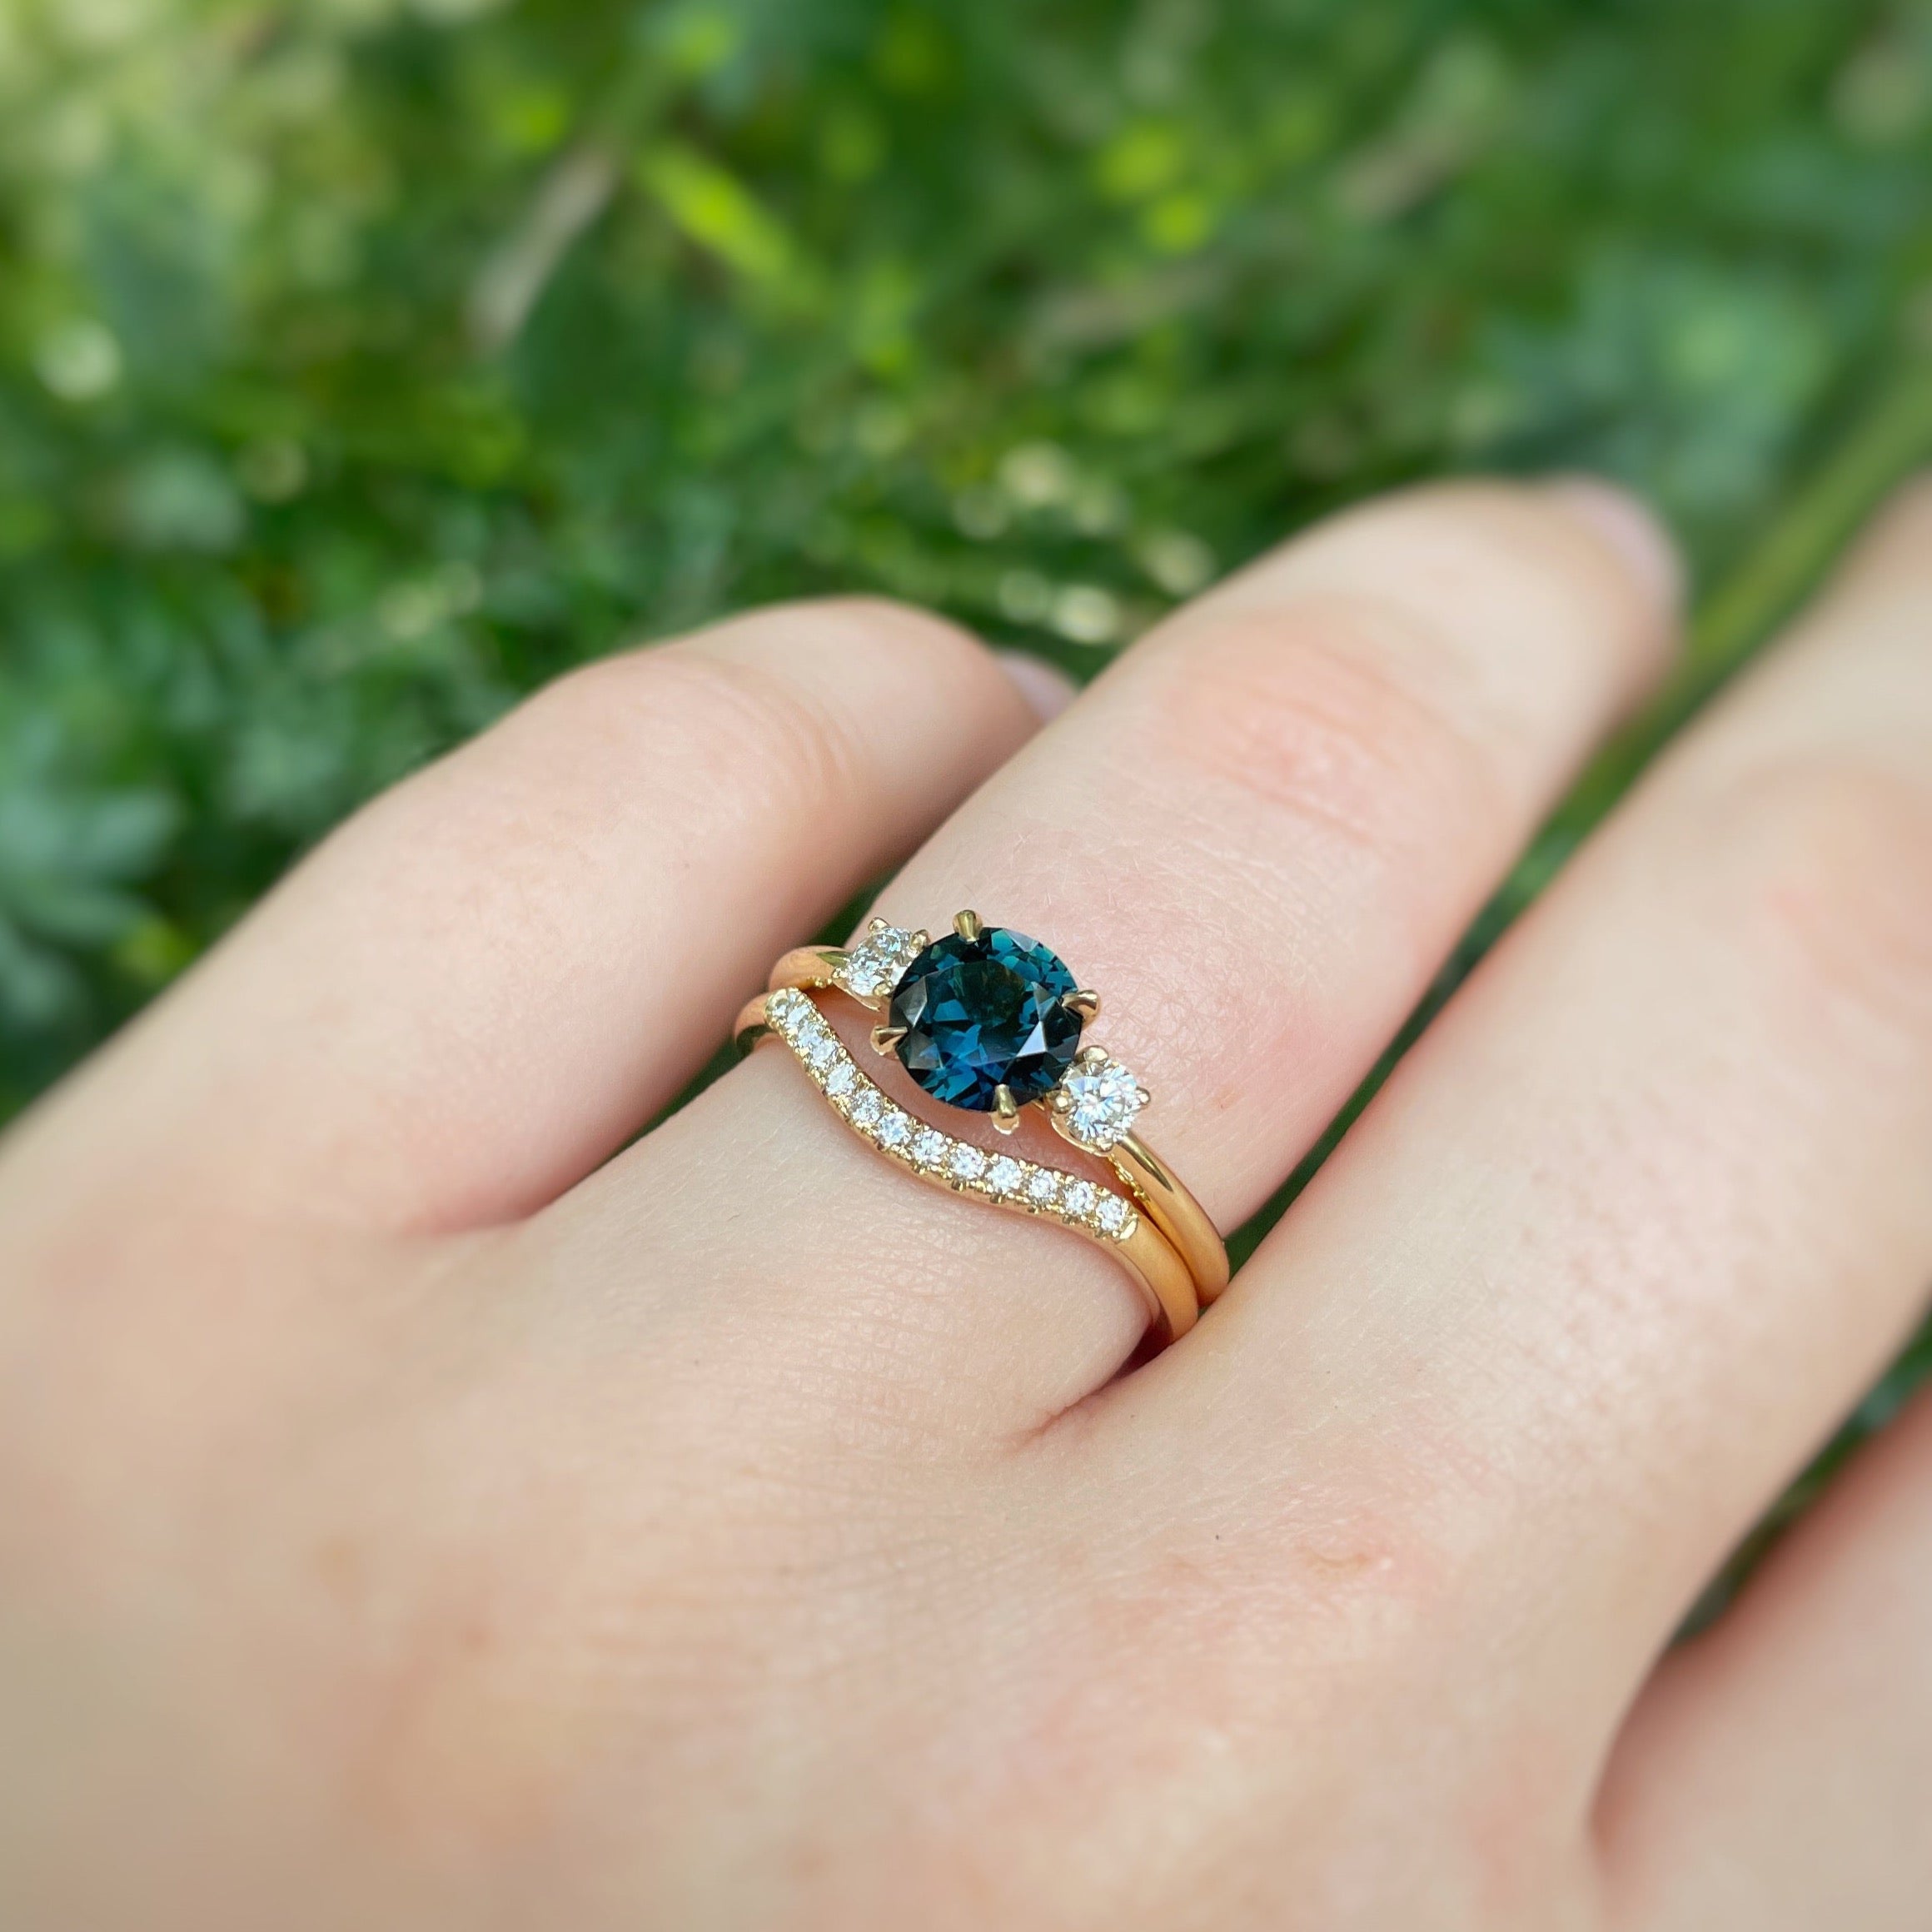 Natural Blue Sapphire Engagement Ring in 14k Gold / Pear Shape Genuine Sapphire  Diamond Ring Available in Gold, Rose Gold, and White GoldVV - Gems N Diamond